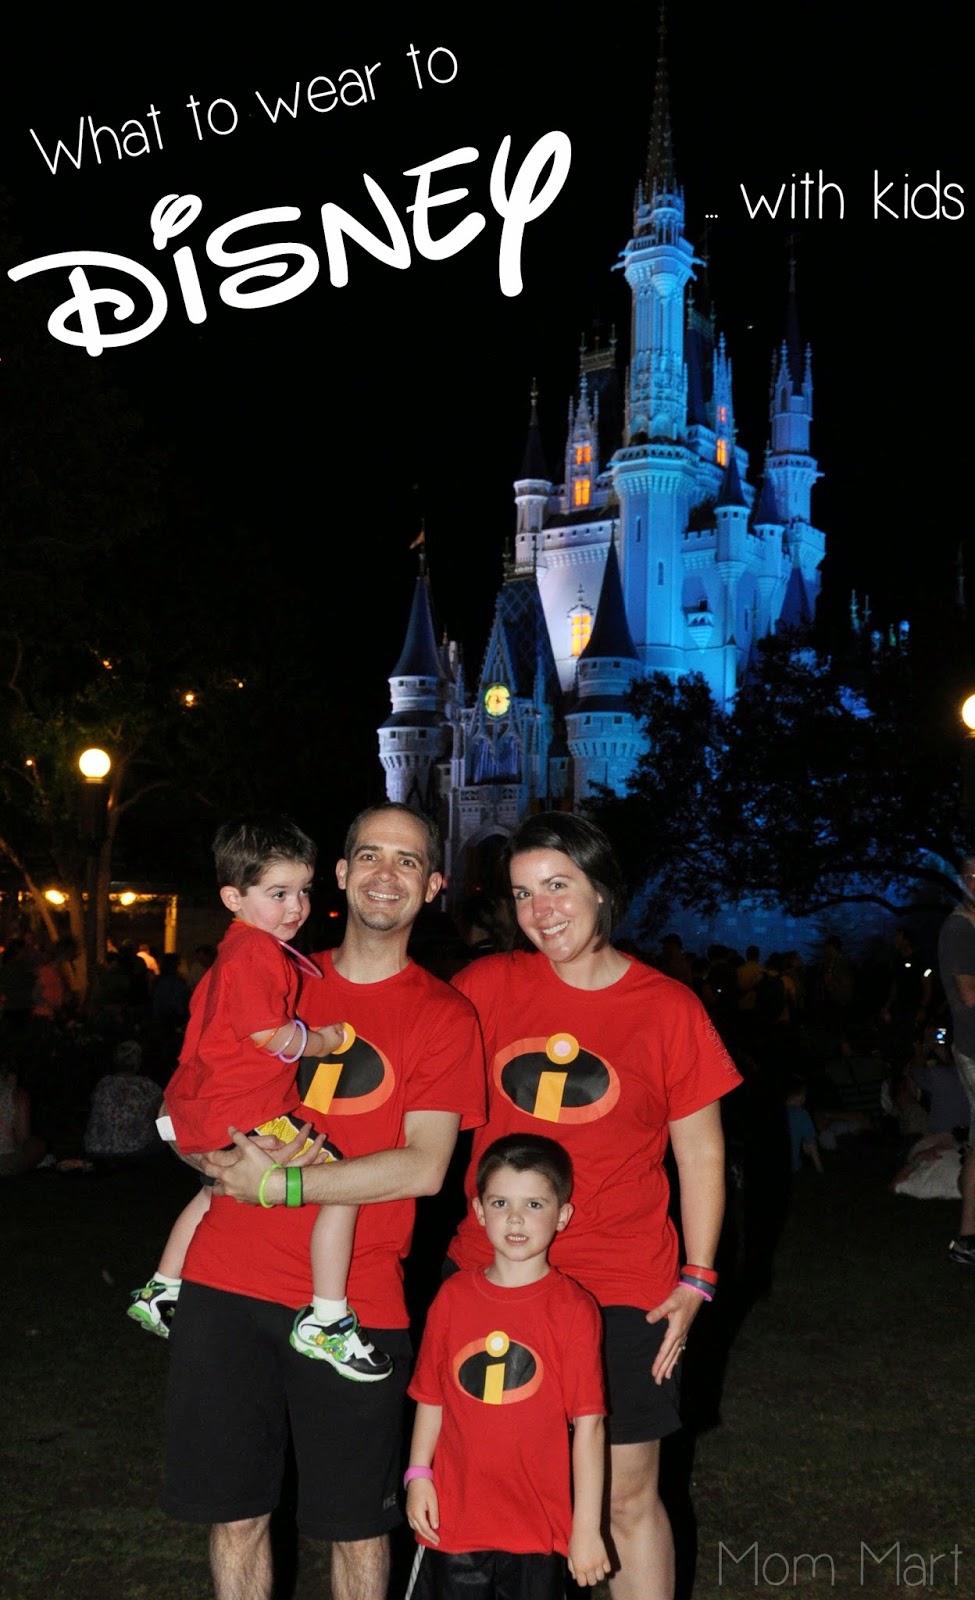 What to wear to Disney World with kids #Disney #DisneyVacation #MatchingShirts Mom Mart